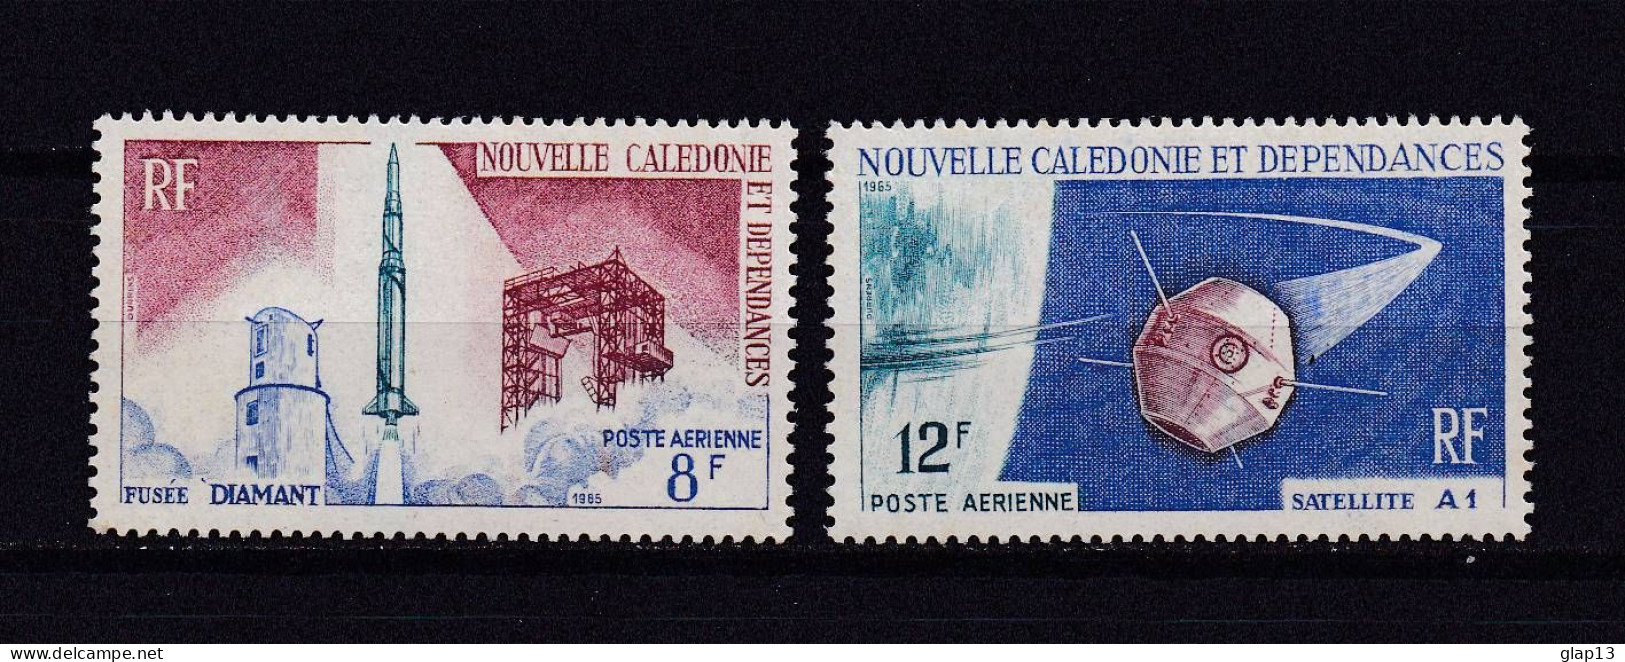 NOUVELLE-CALEDONIE 1966 PA N°84/85 NEUF AVEC CHARNIERE SATELLITE - Nuevos